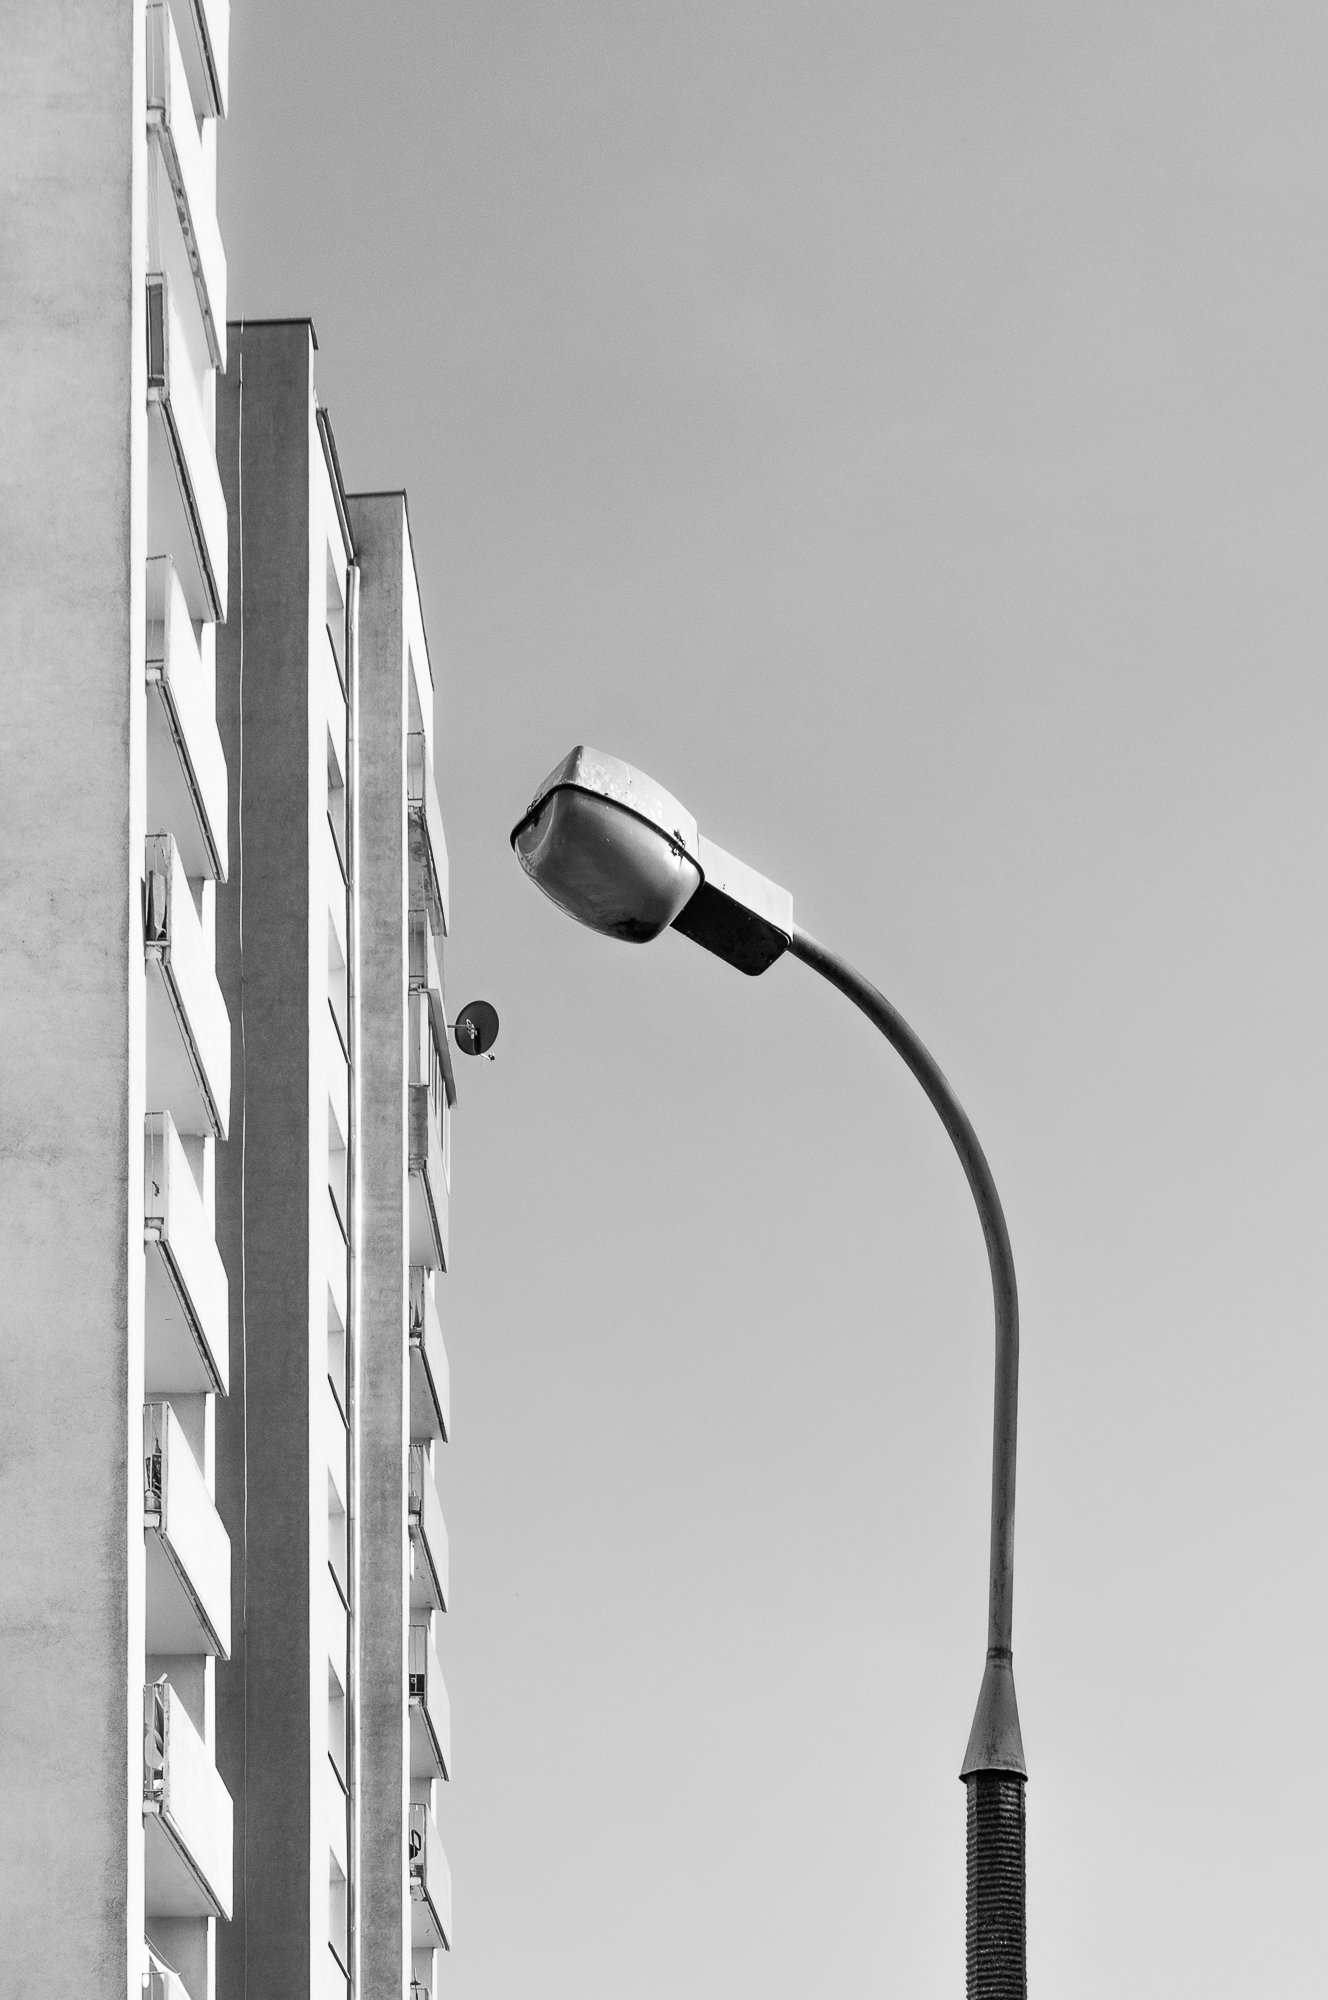 Adam Mazek Photography Warsaw 2020. Post: "Increased physical activity." Street lamp. Perspective. Minimalism.